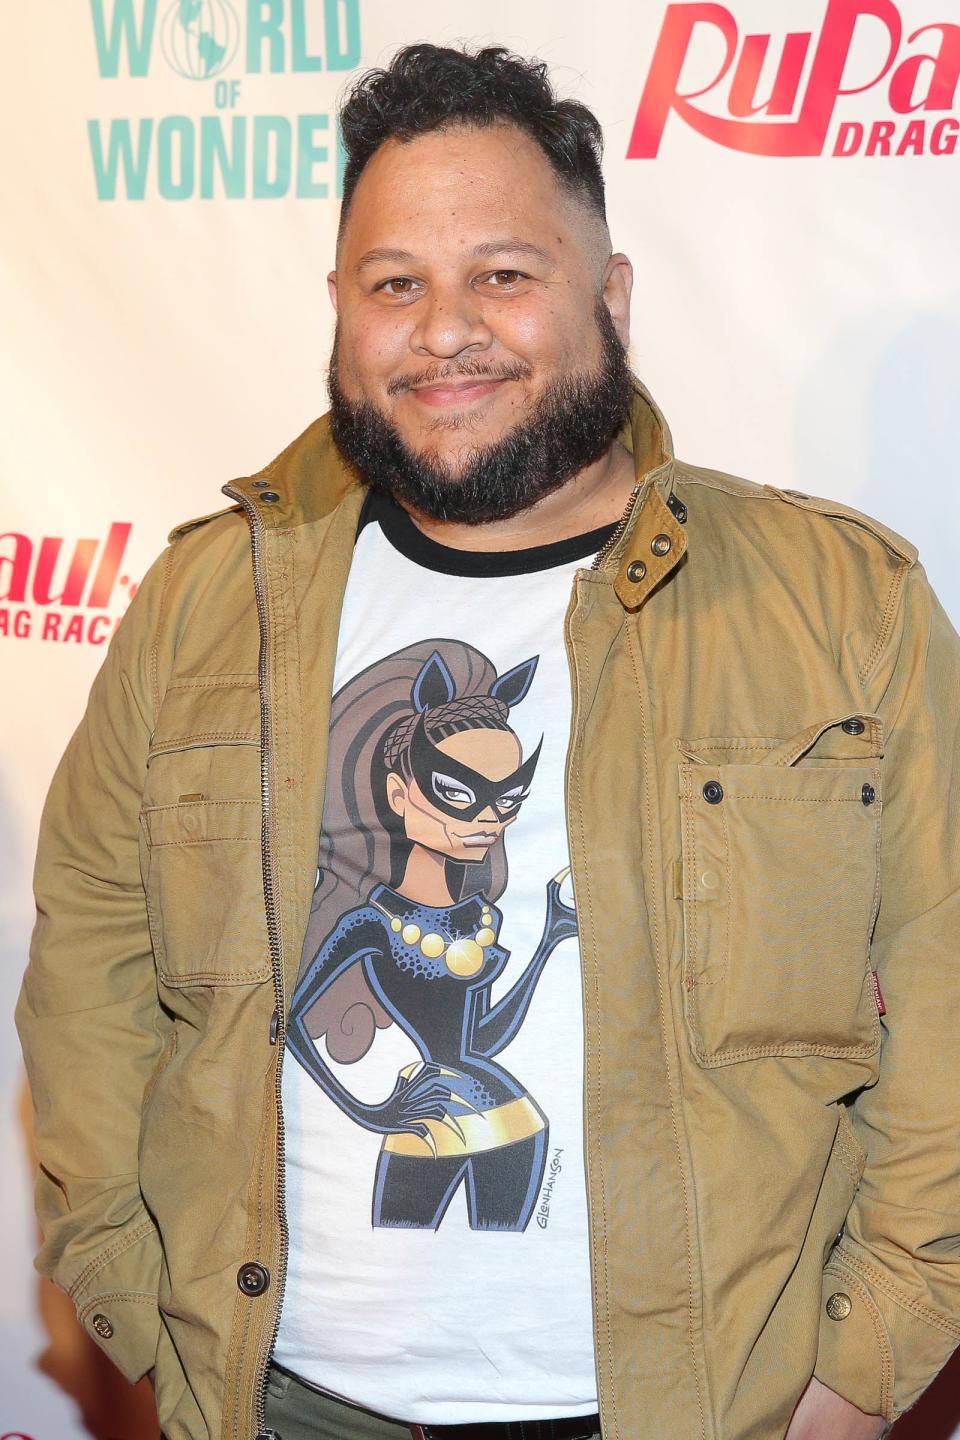 Person wearing a beige jacket over a graphic T-shirt with a superhero design, standing on a red carpet at the RuPaul's Drag Race event